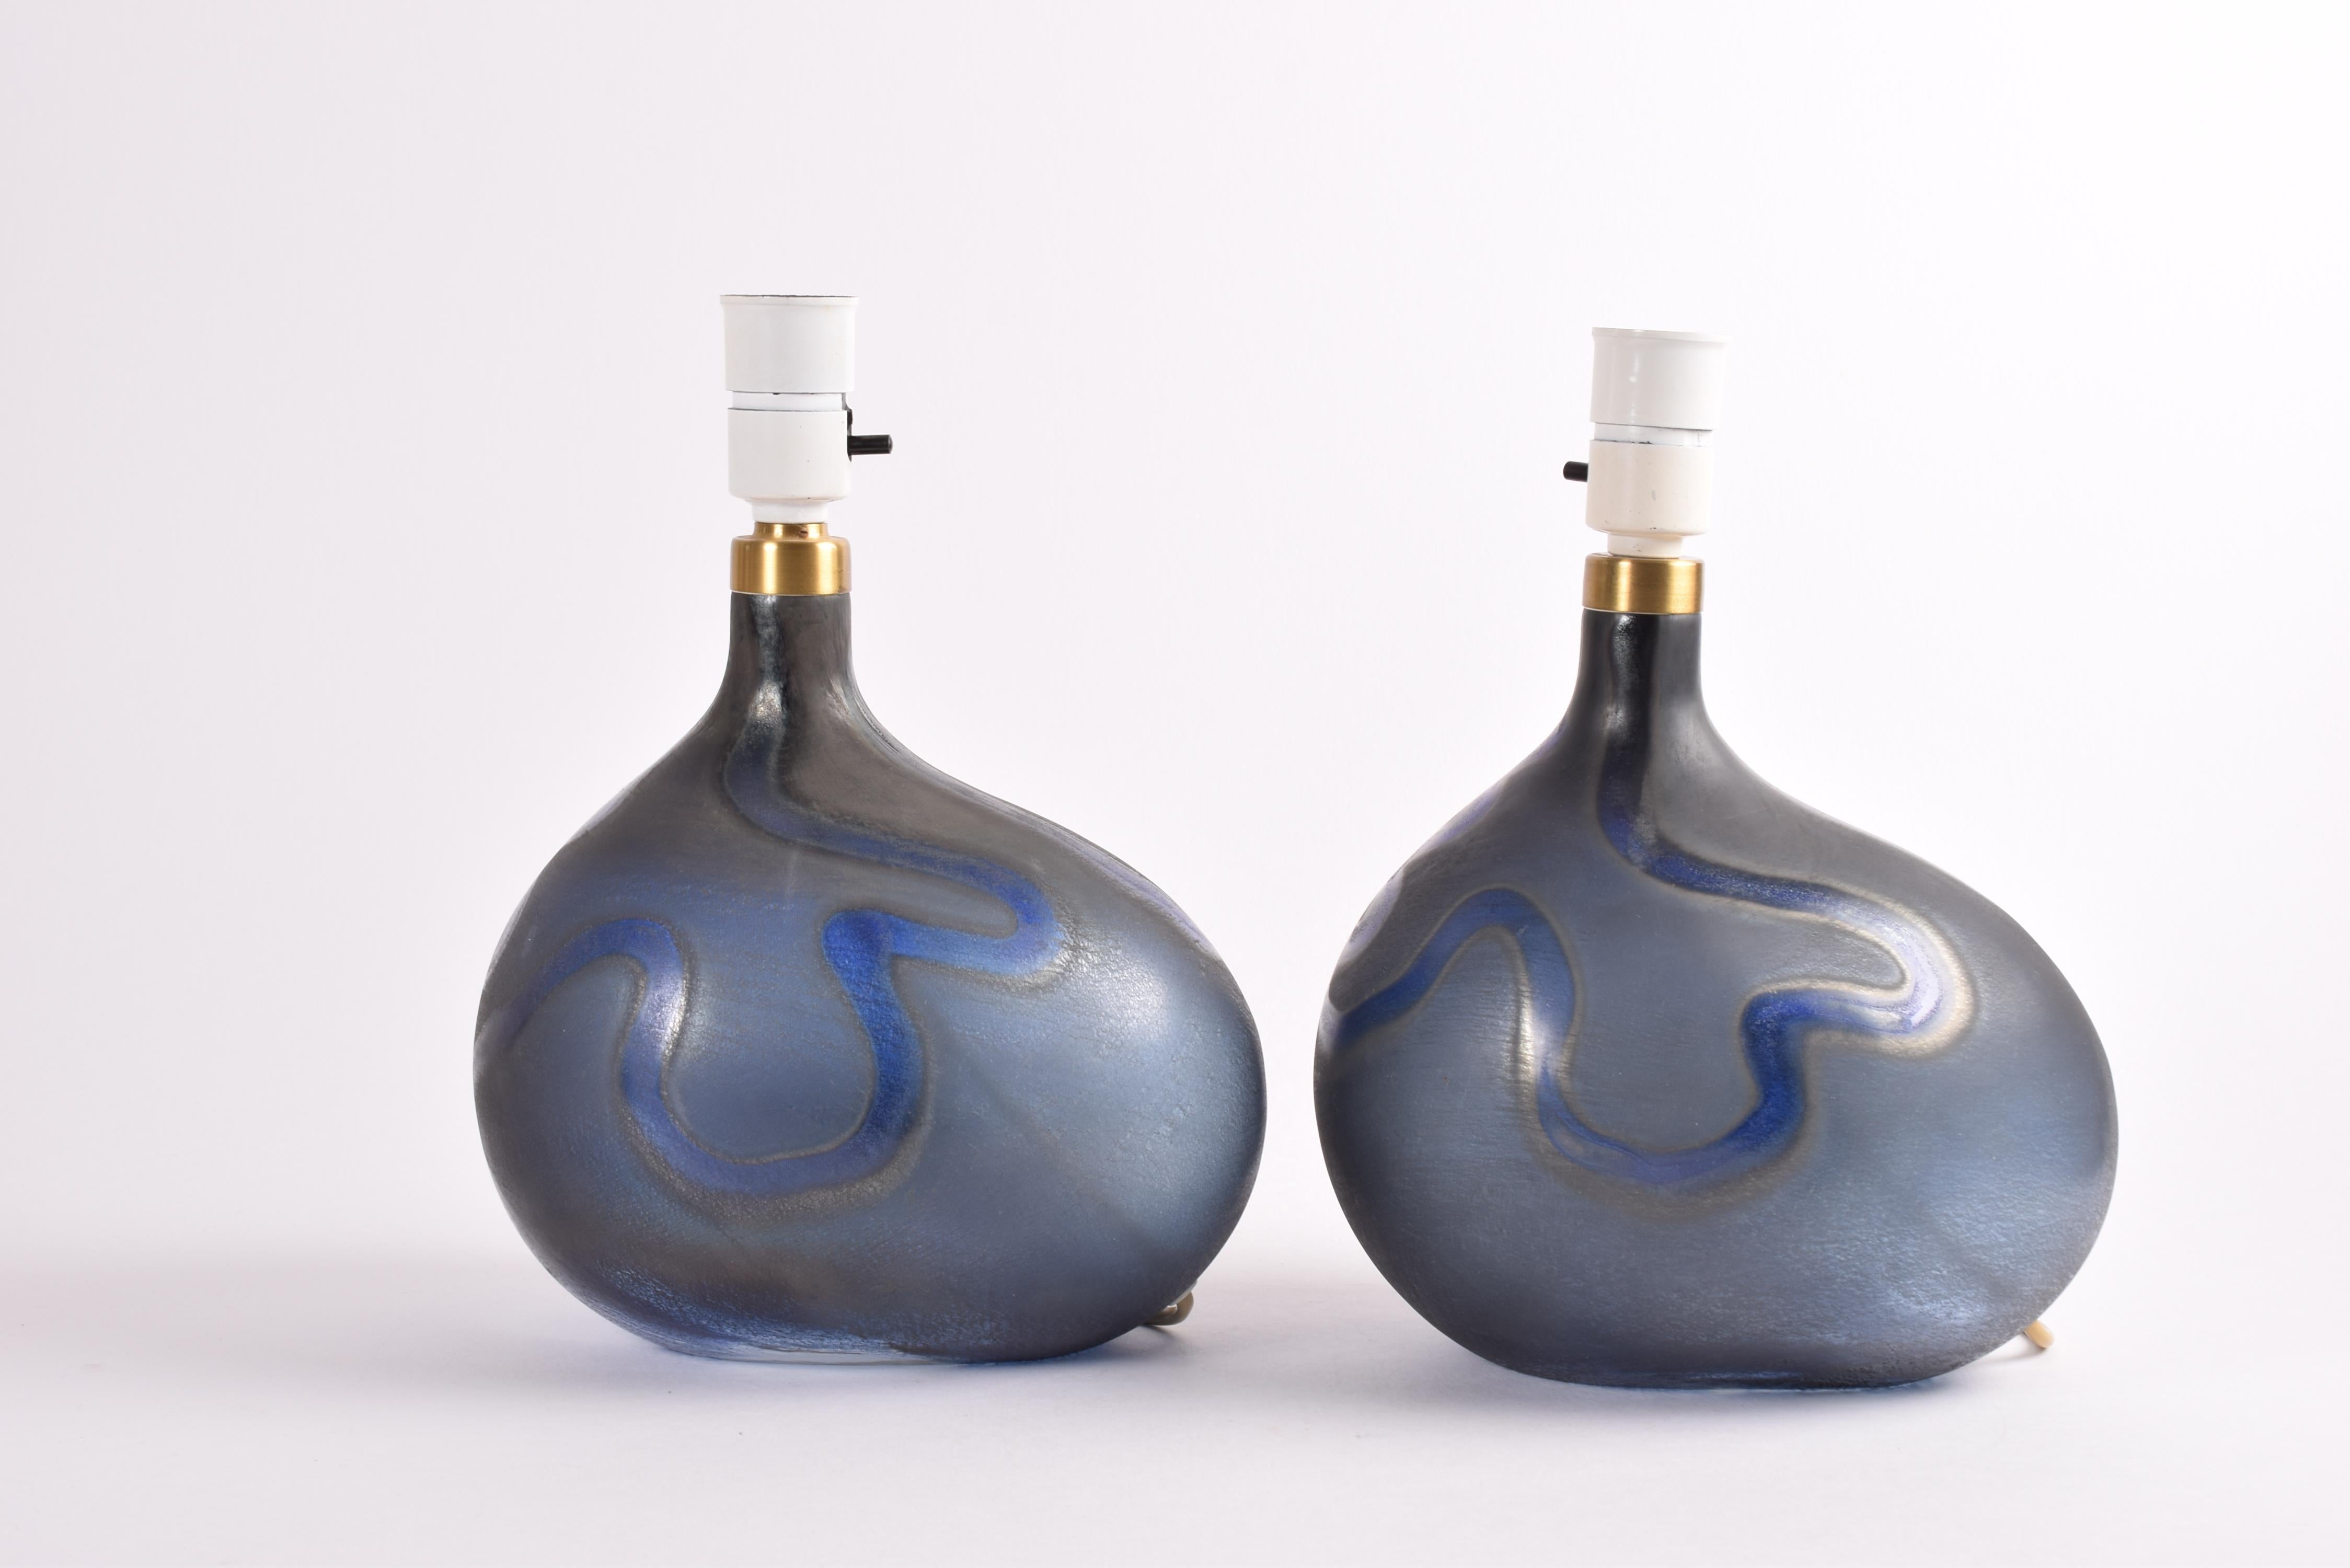 Pair of Holmegaard Blue Sculptural Glass Table Lamps Medium, Danish Modern 1970s For Sale 3